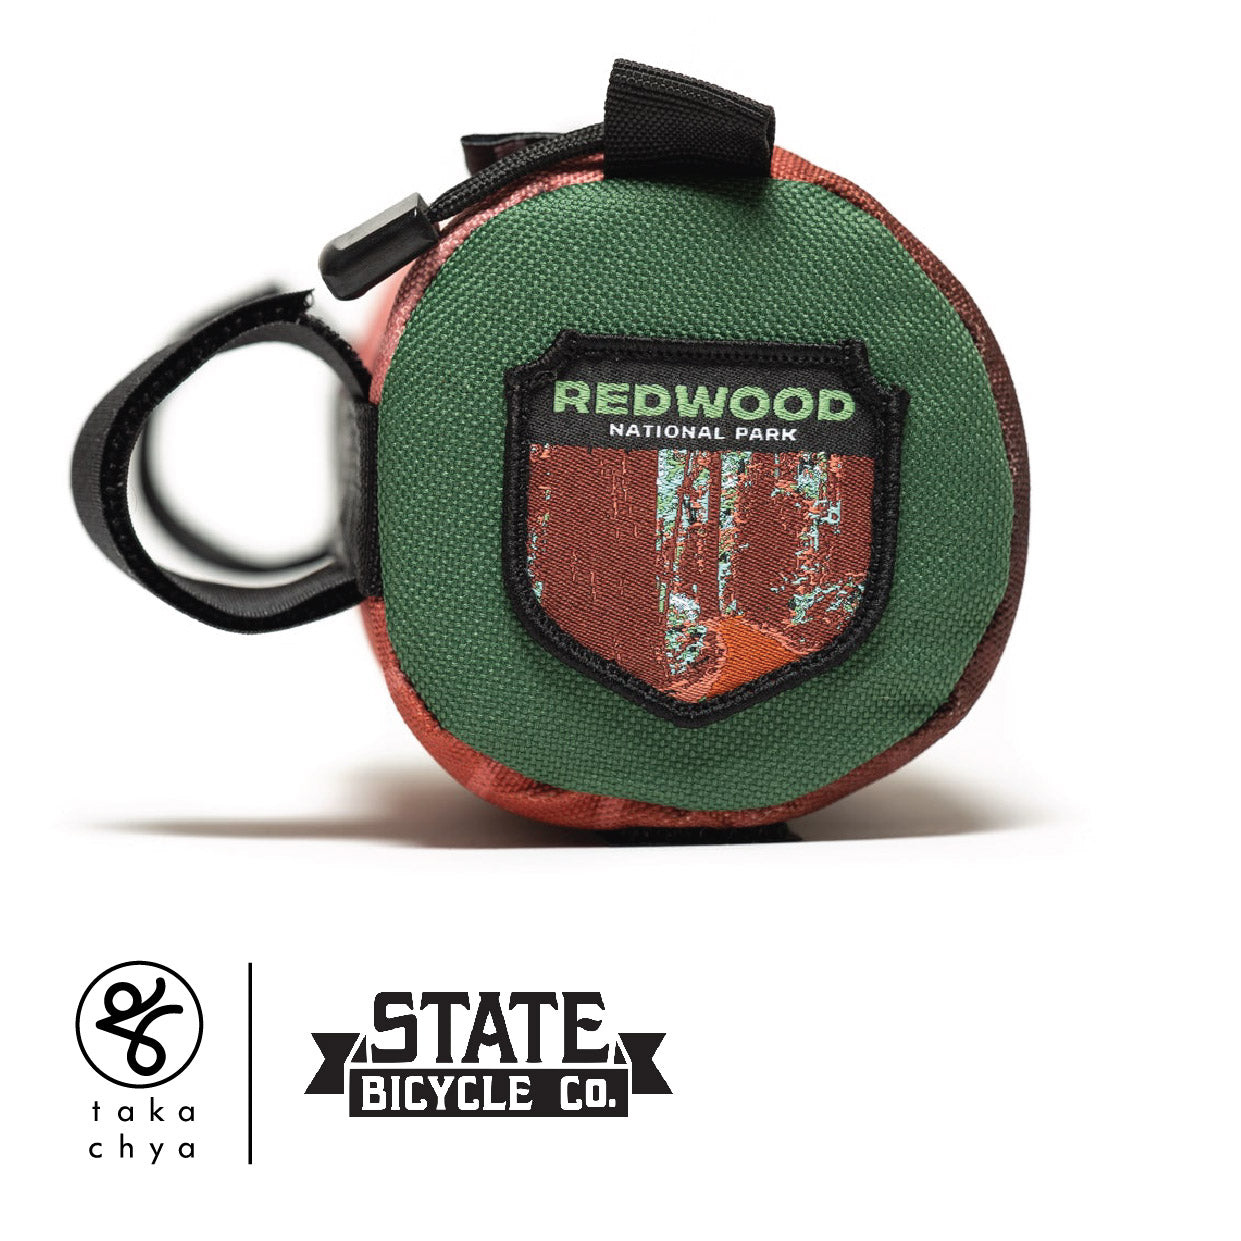 STATE BICYCLE CO. X NATIONAL PARK FOUNDATION - ALL-ROAD HANDLEBAR BAG - REDWOOD